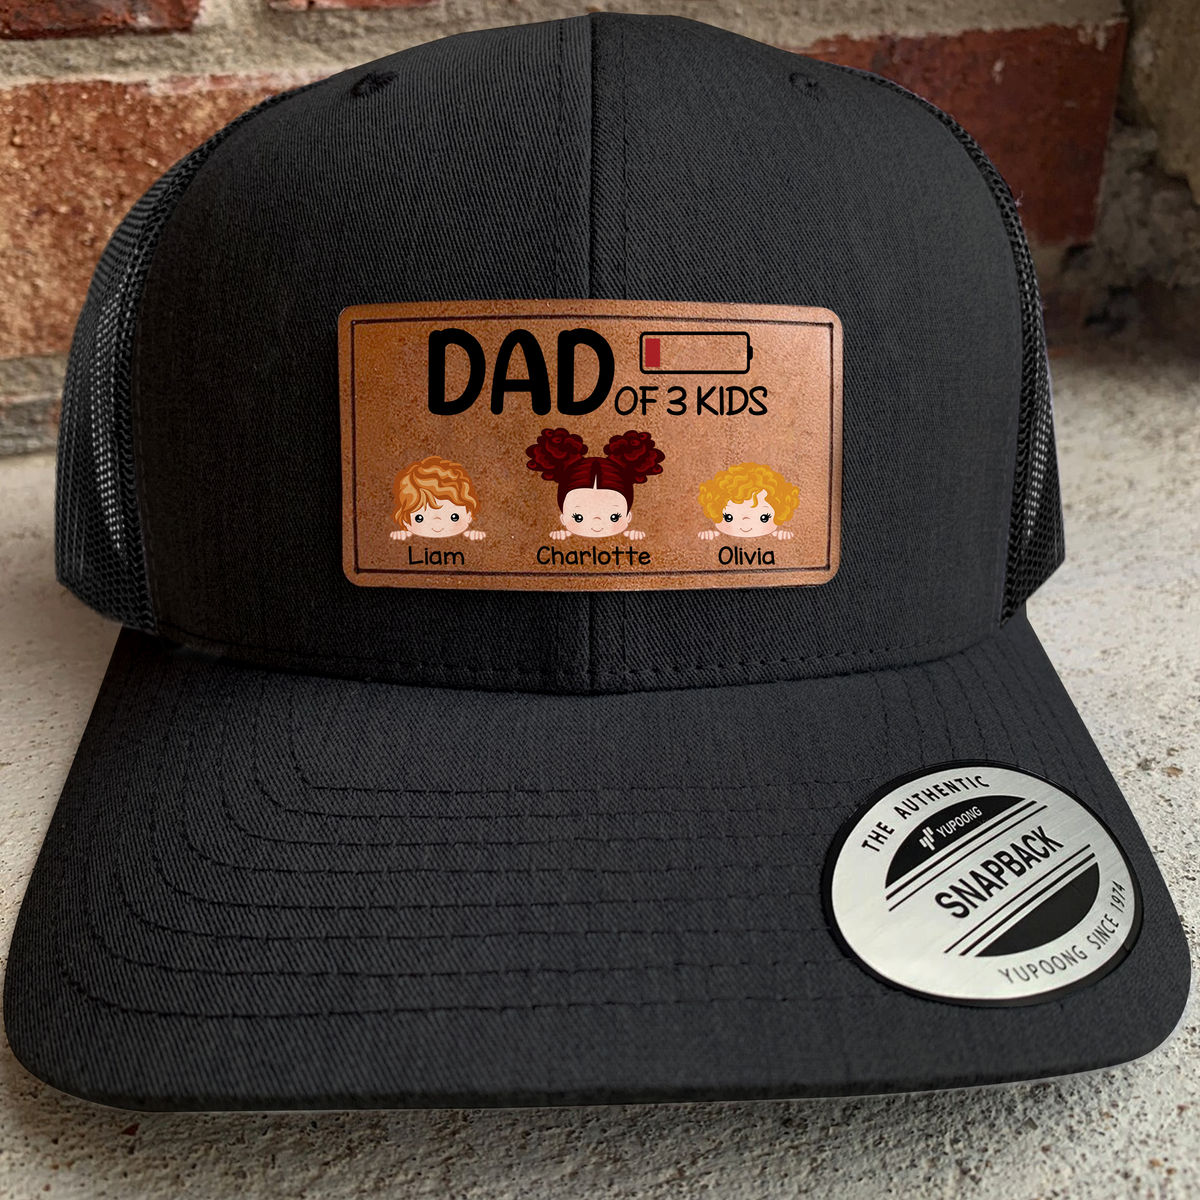 Personalized Dad Hats - Dad of Kid - Personalized Cap Ver 2 - Gifts for Him, Dad, Family Members, Father's Day Gifts, Birthday, Xmas Gifts - Hat 